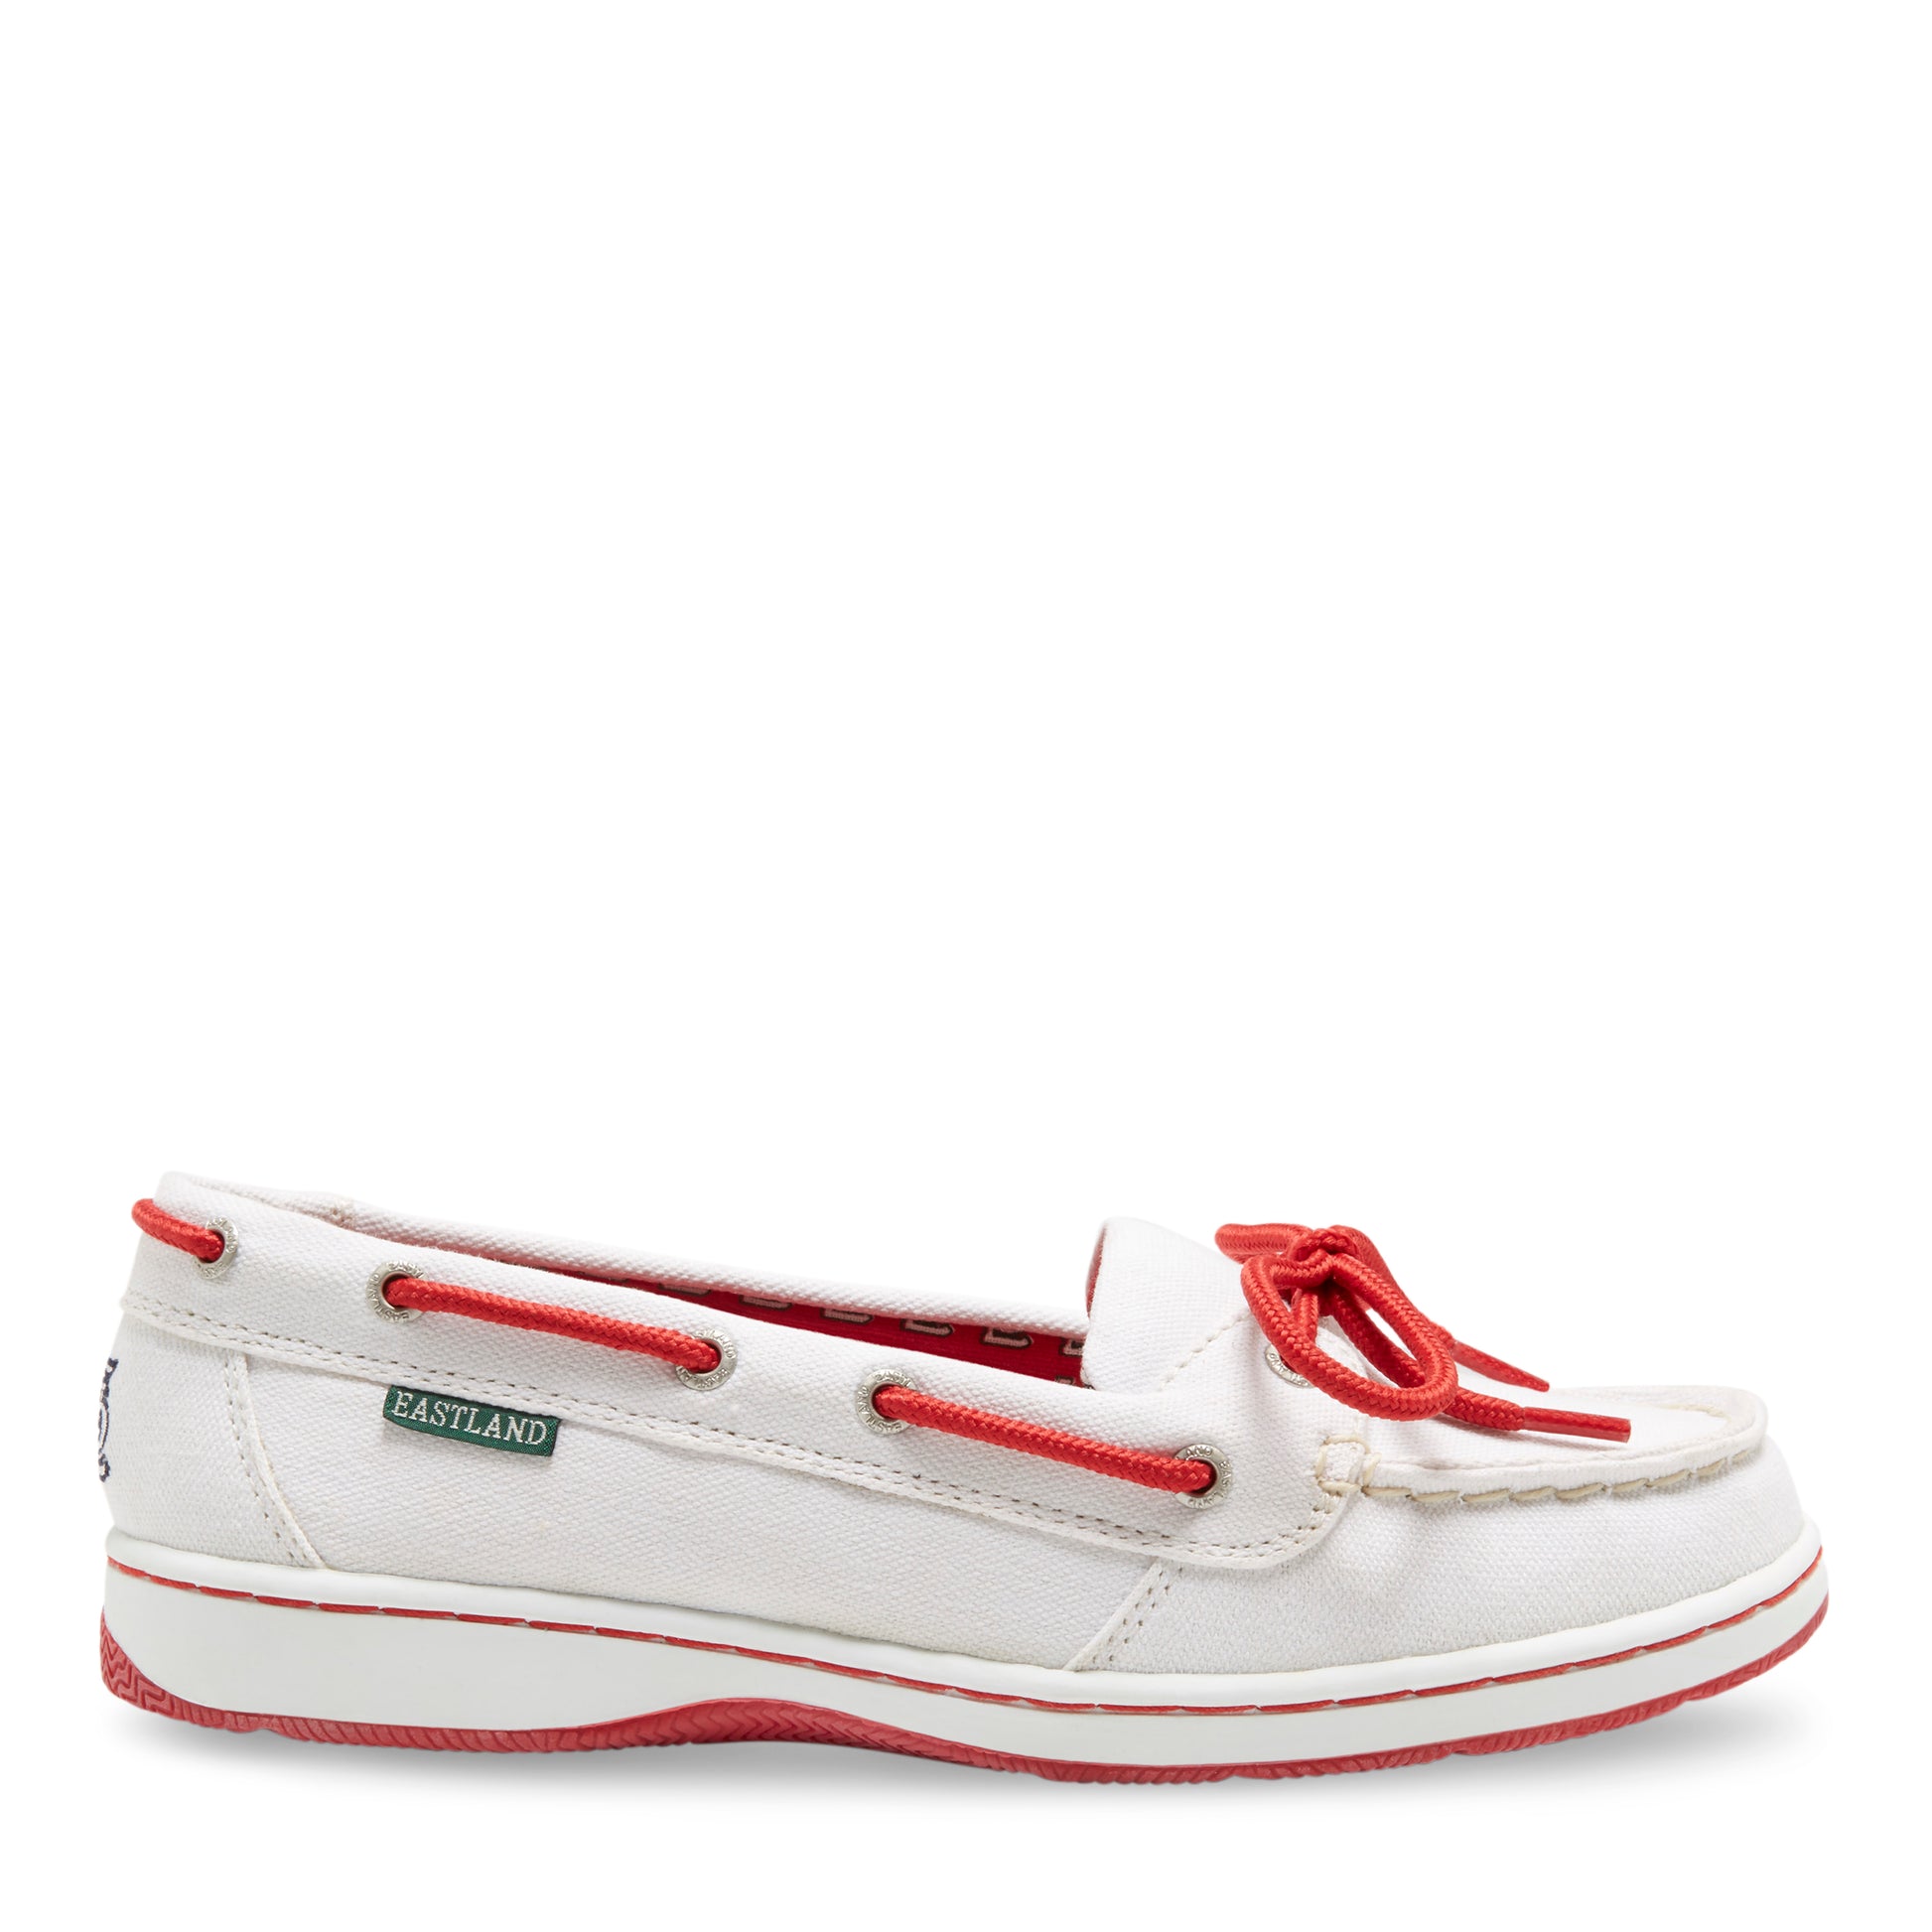 St. Louis Cardinals Womens Boat Shoes by Eastland